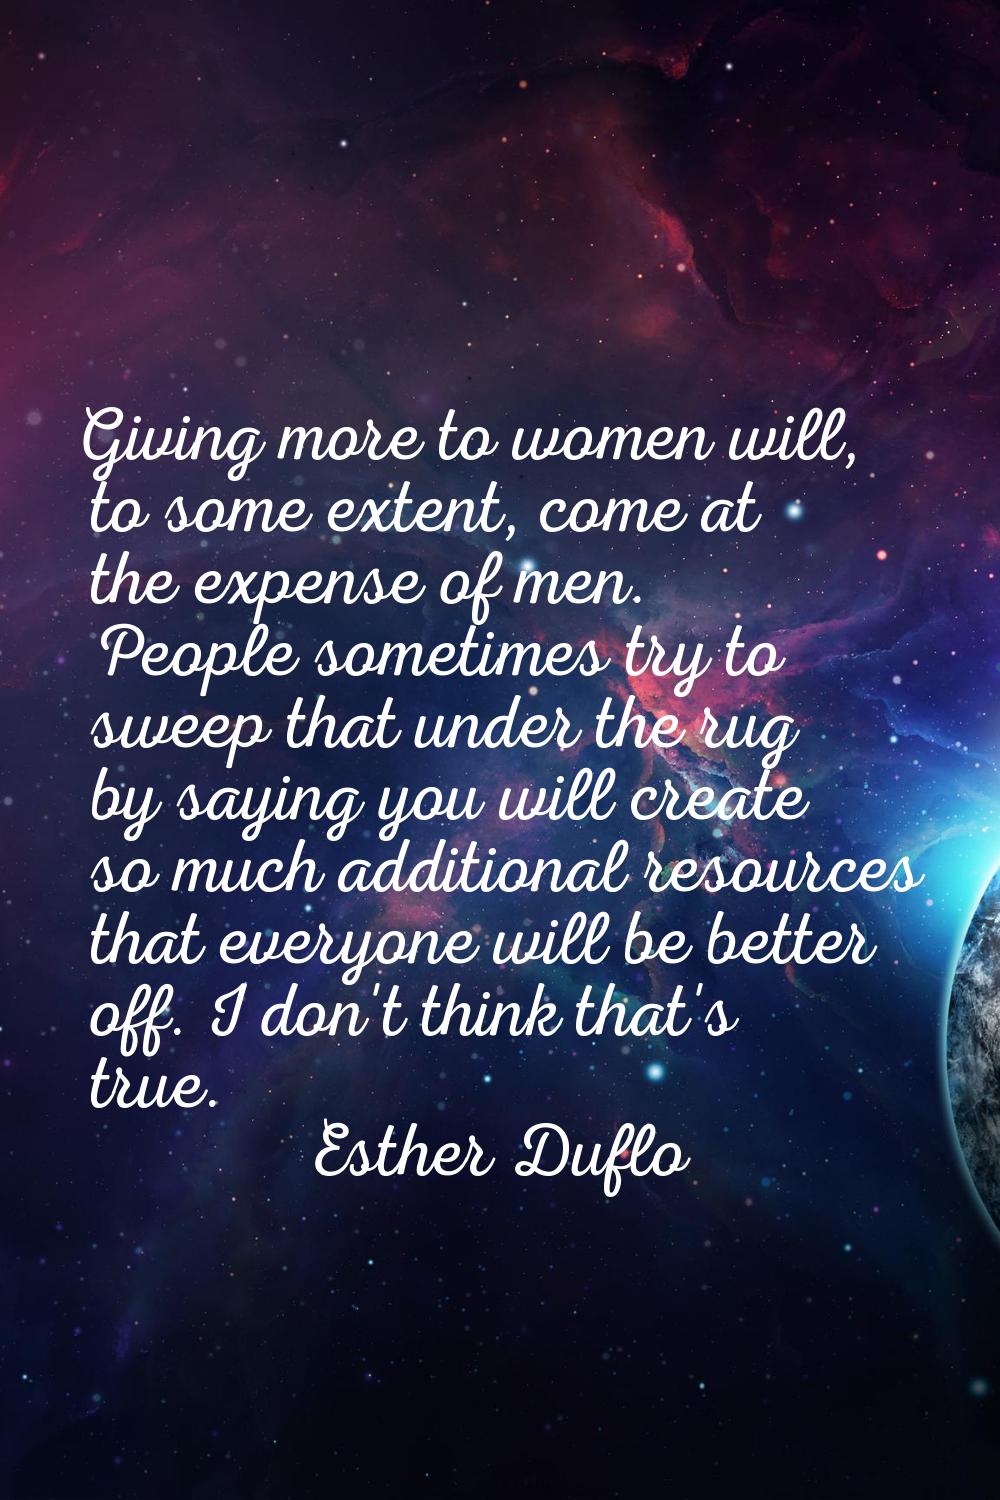 Giving more to women will, to some extent, come at the expense of men. People sometimes try to swee